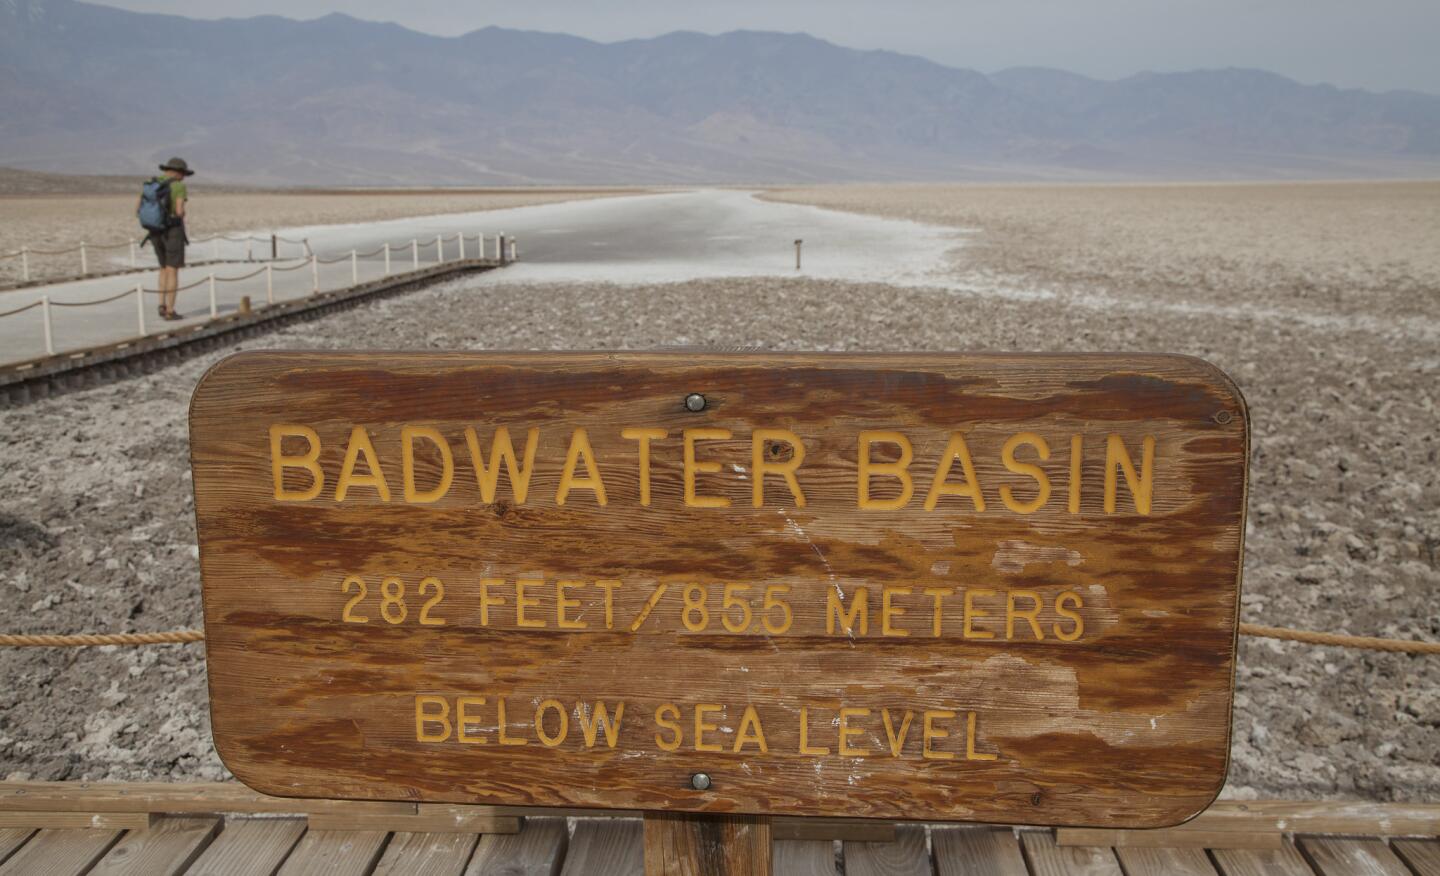 The lowest point in North America, 288 feet below sea level. When you are standing in the basin, you can look up and see this sign high above in the surrounding rocky cliffs.